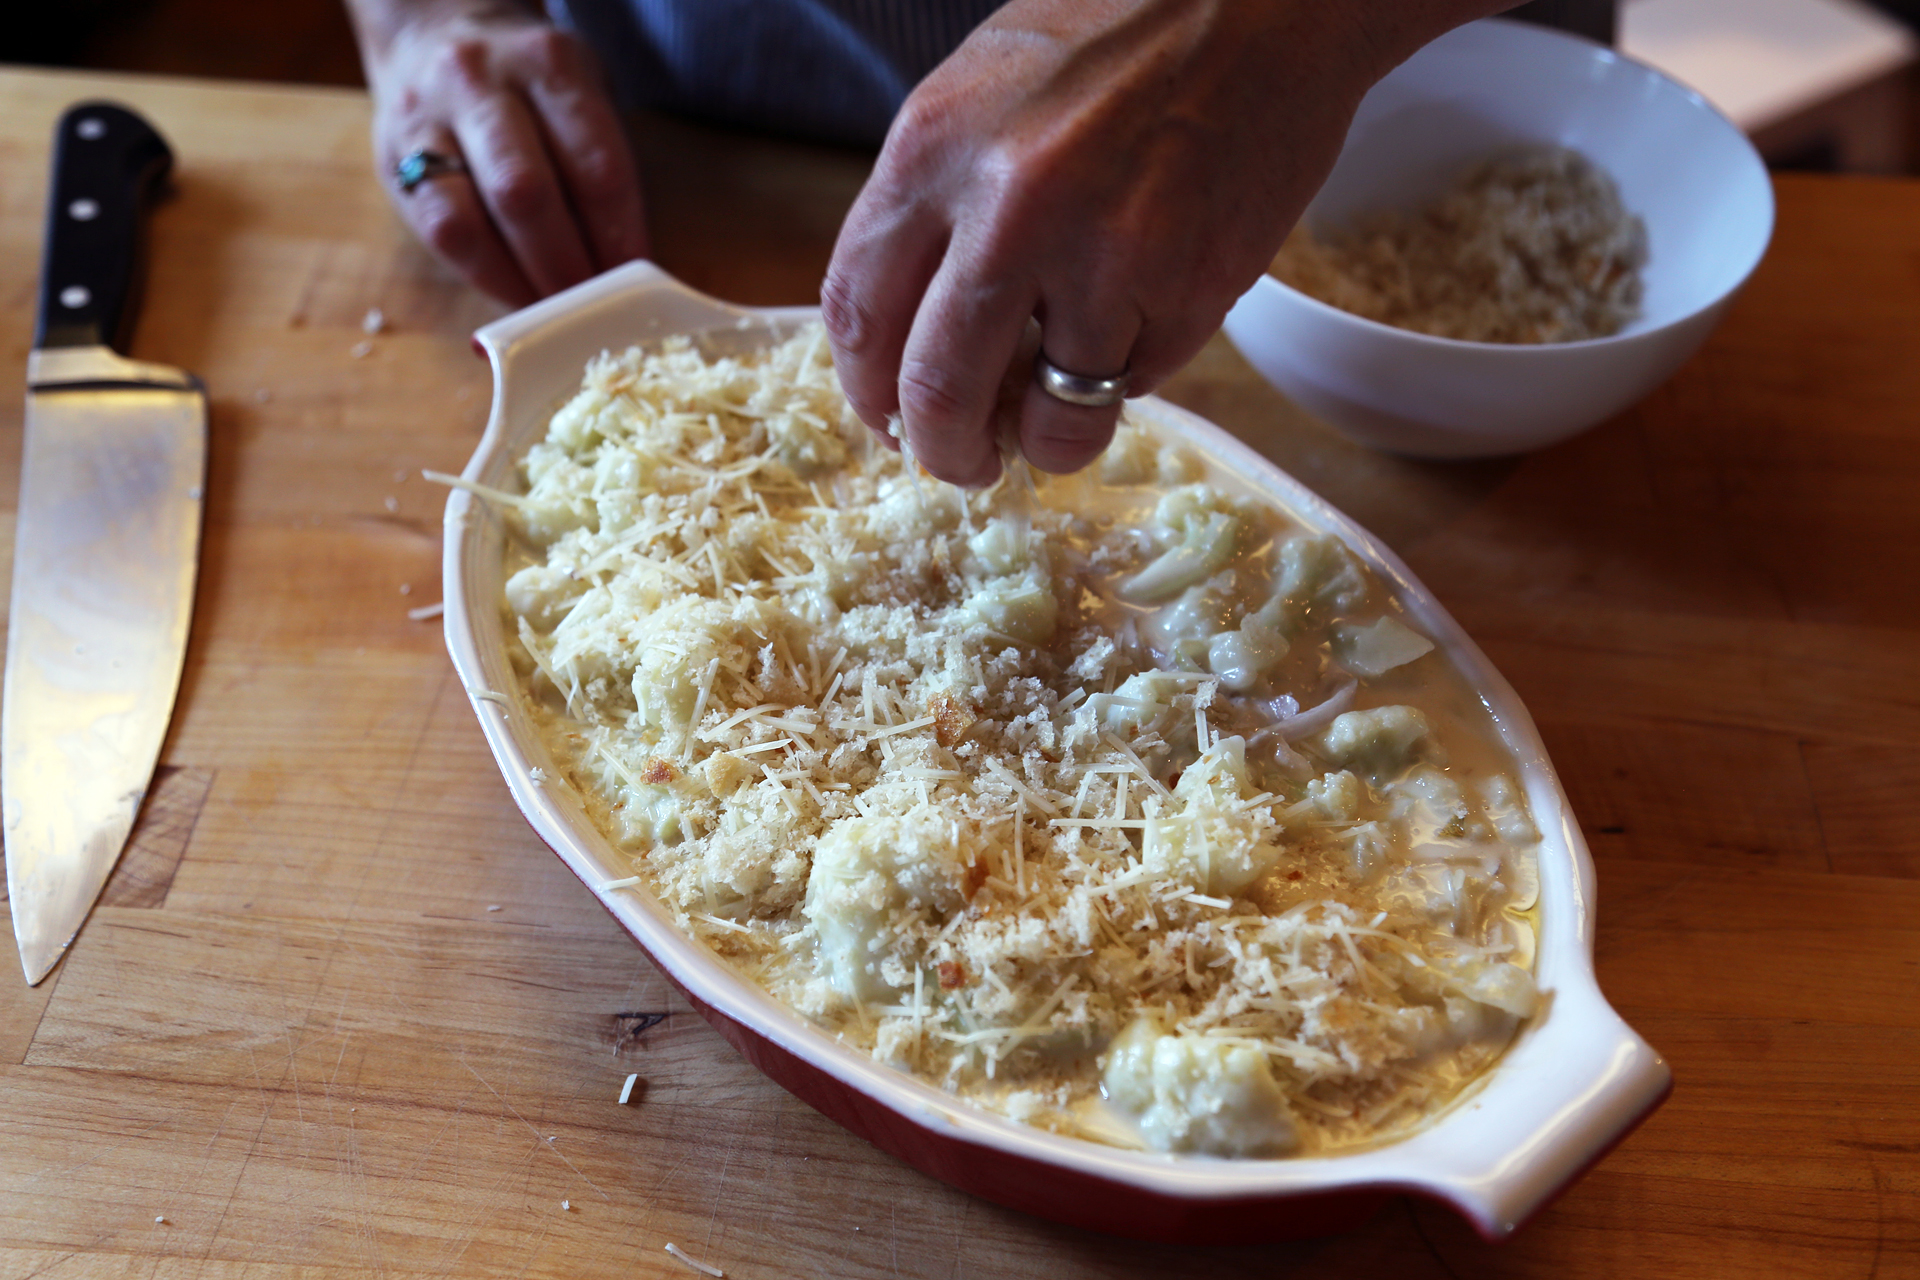 In a bowl, toss the bread crumbs with the remaining 1/4 cup Parmesan. Sprinkle over the top.